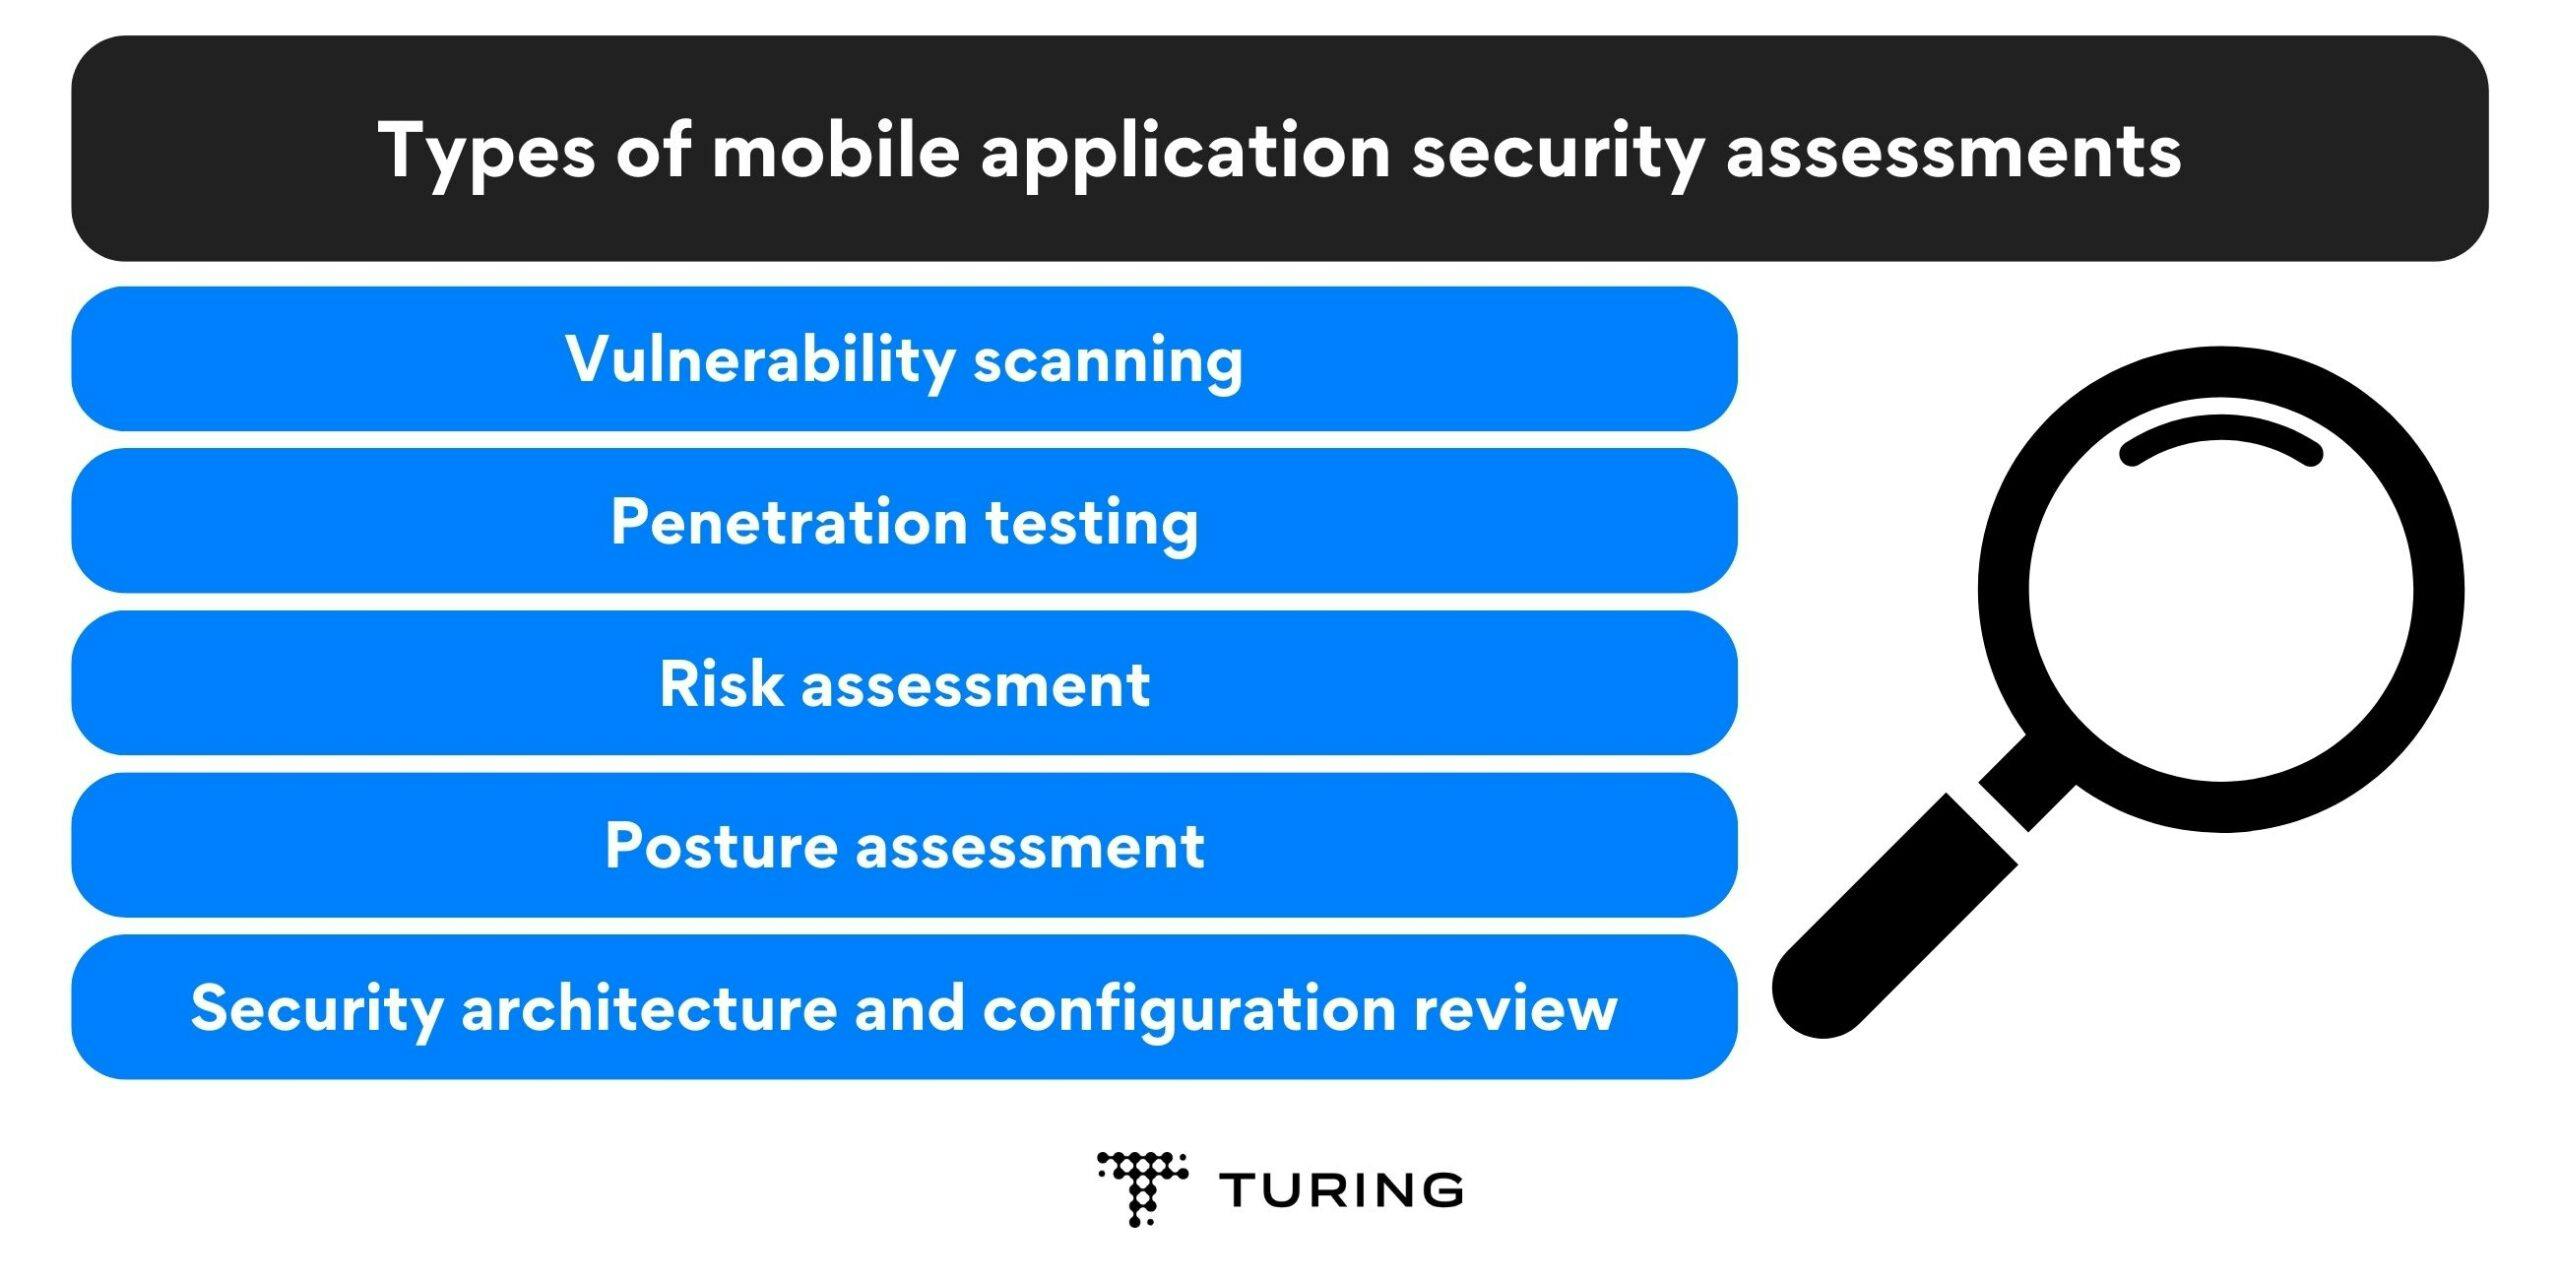 Types of mobile application security assessments